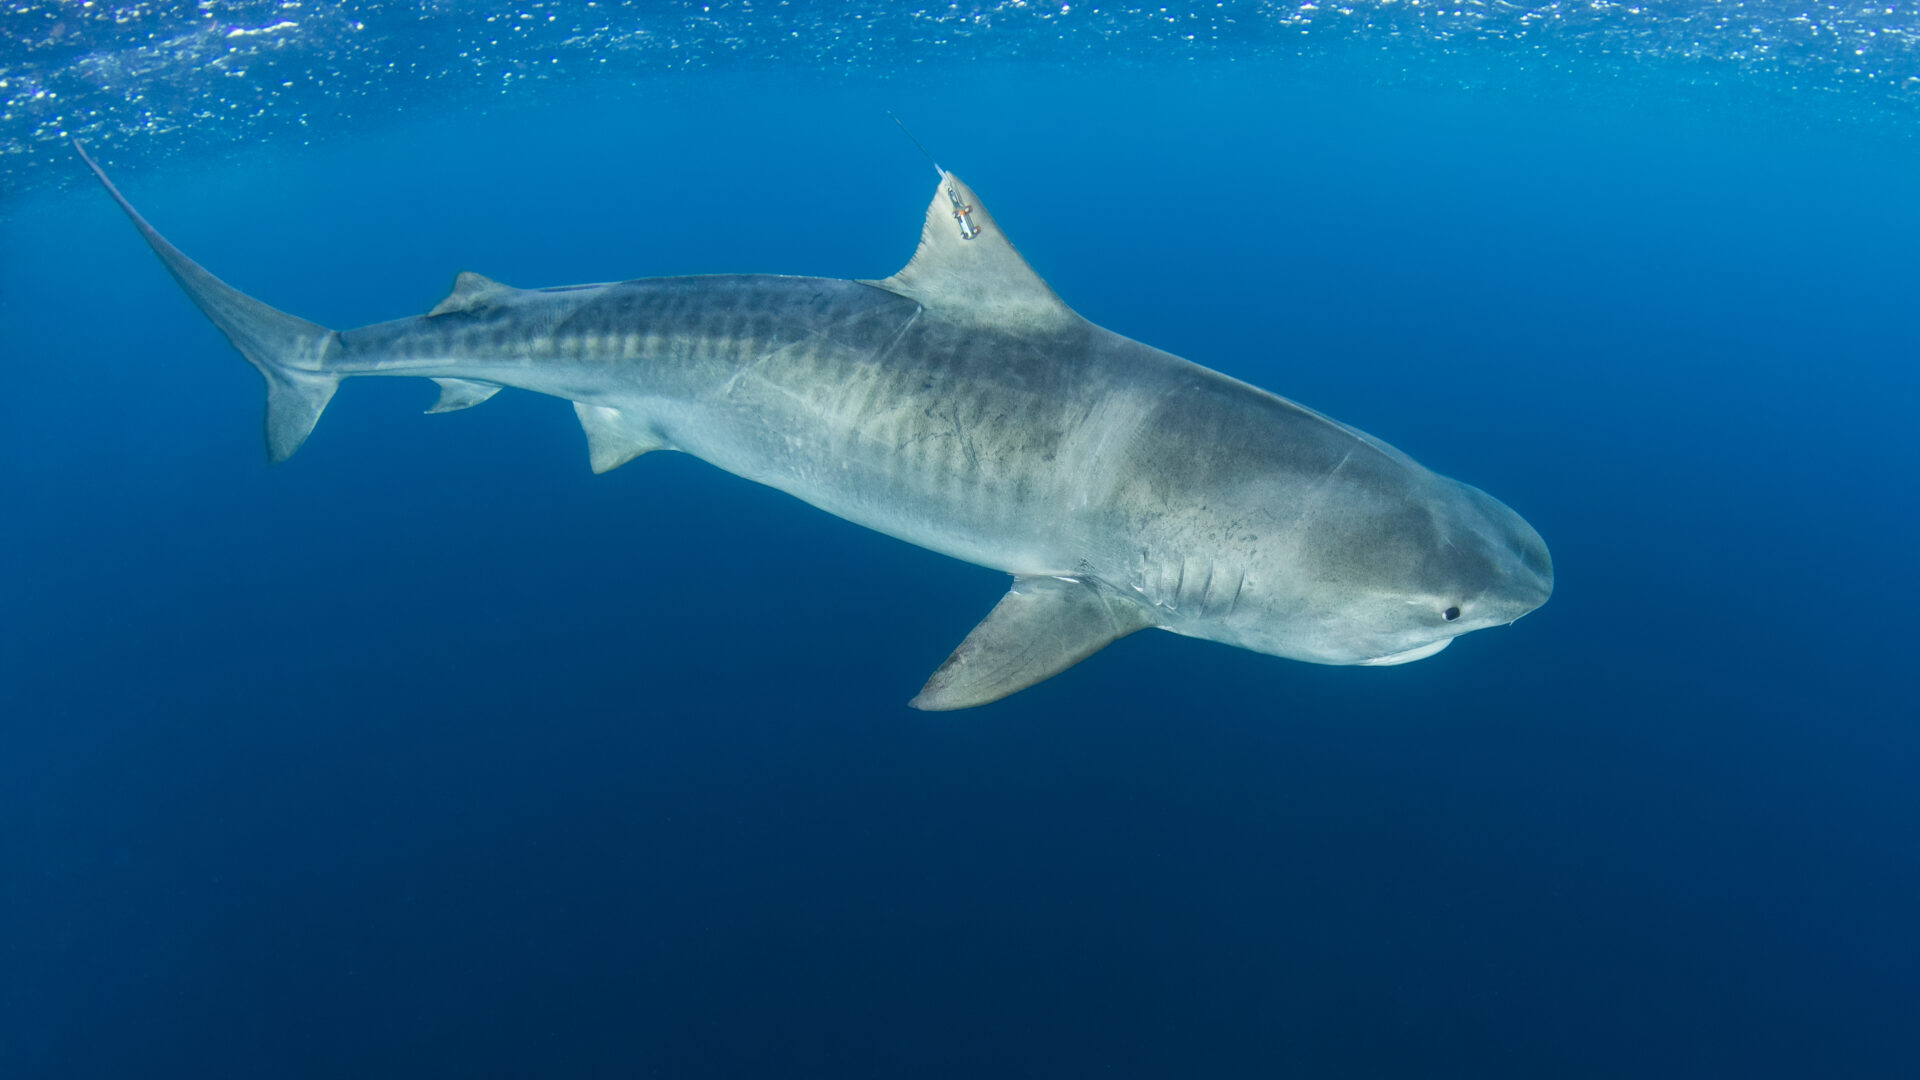 Unraveling the Mysteries of the Saba Bank: DCNA Tiger Shark Expedition 2021